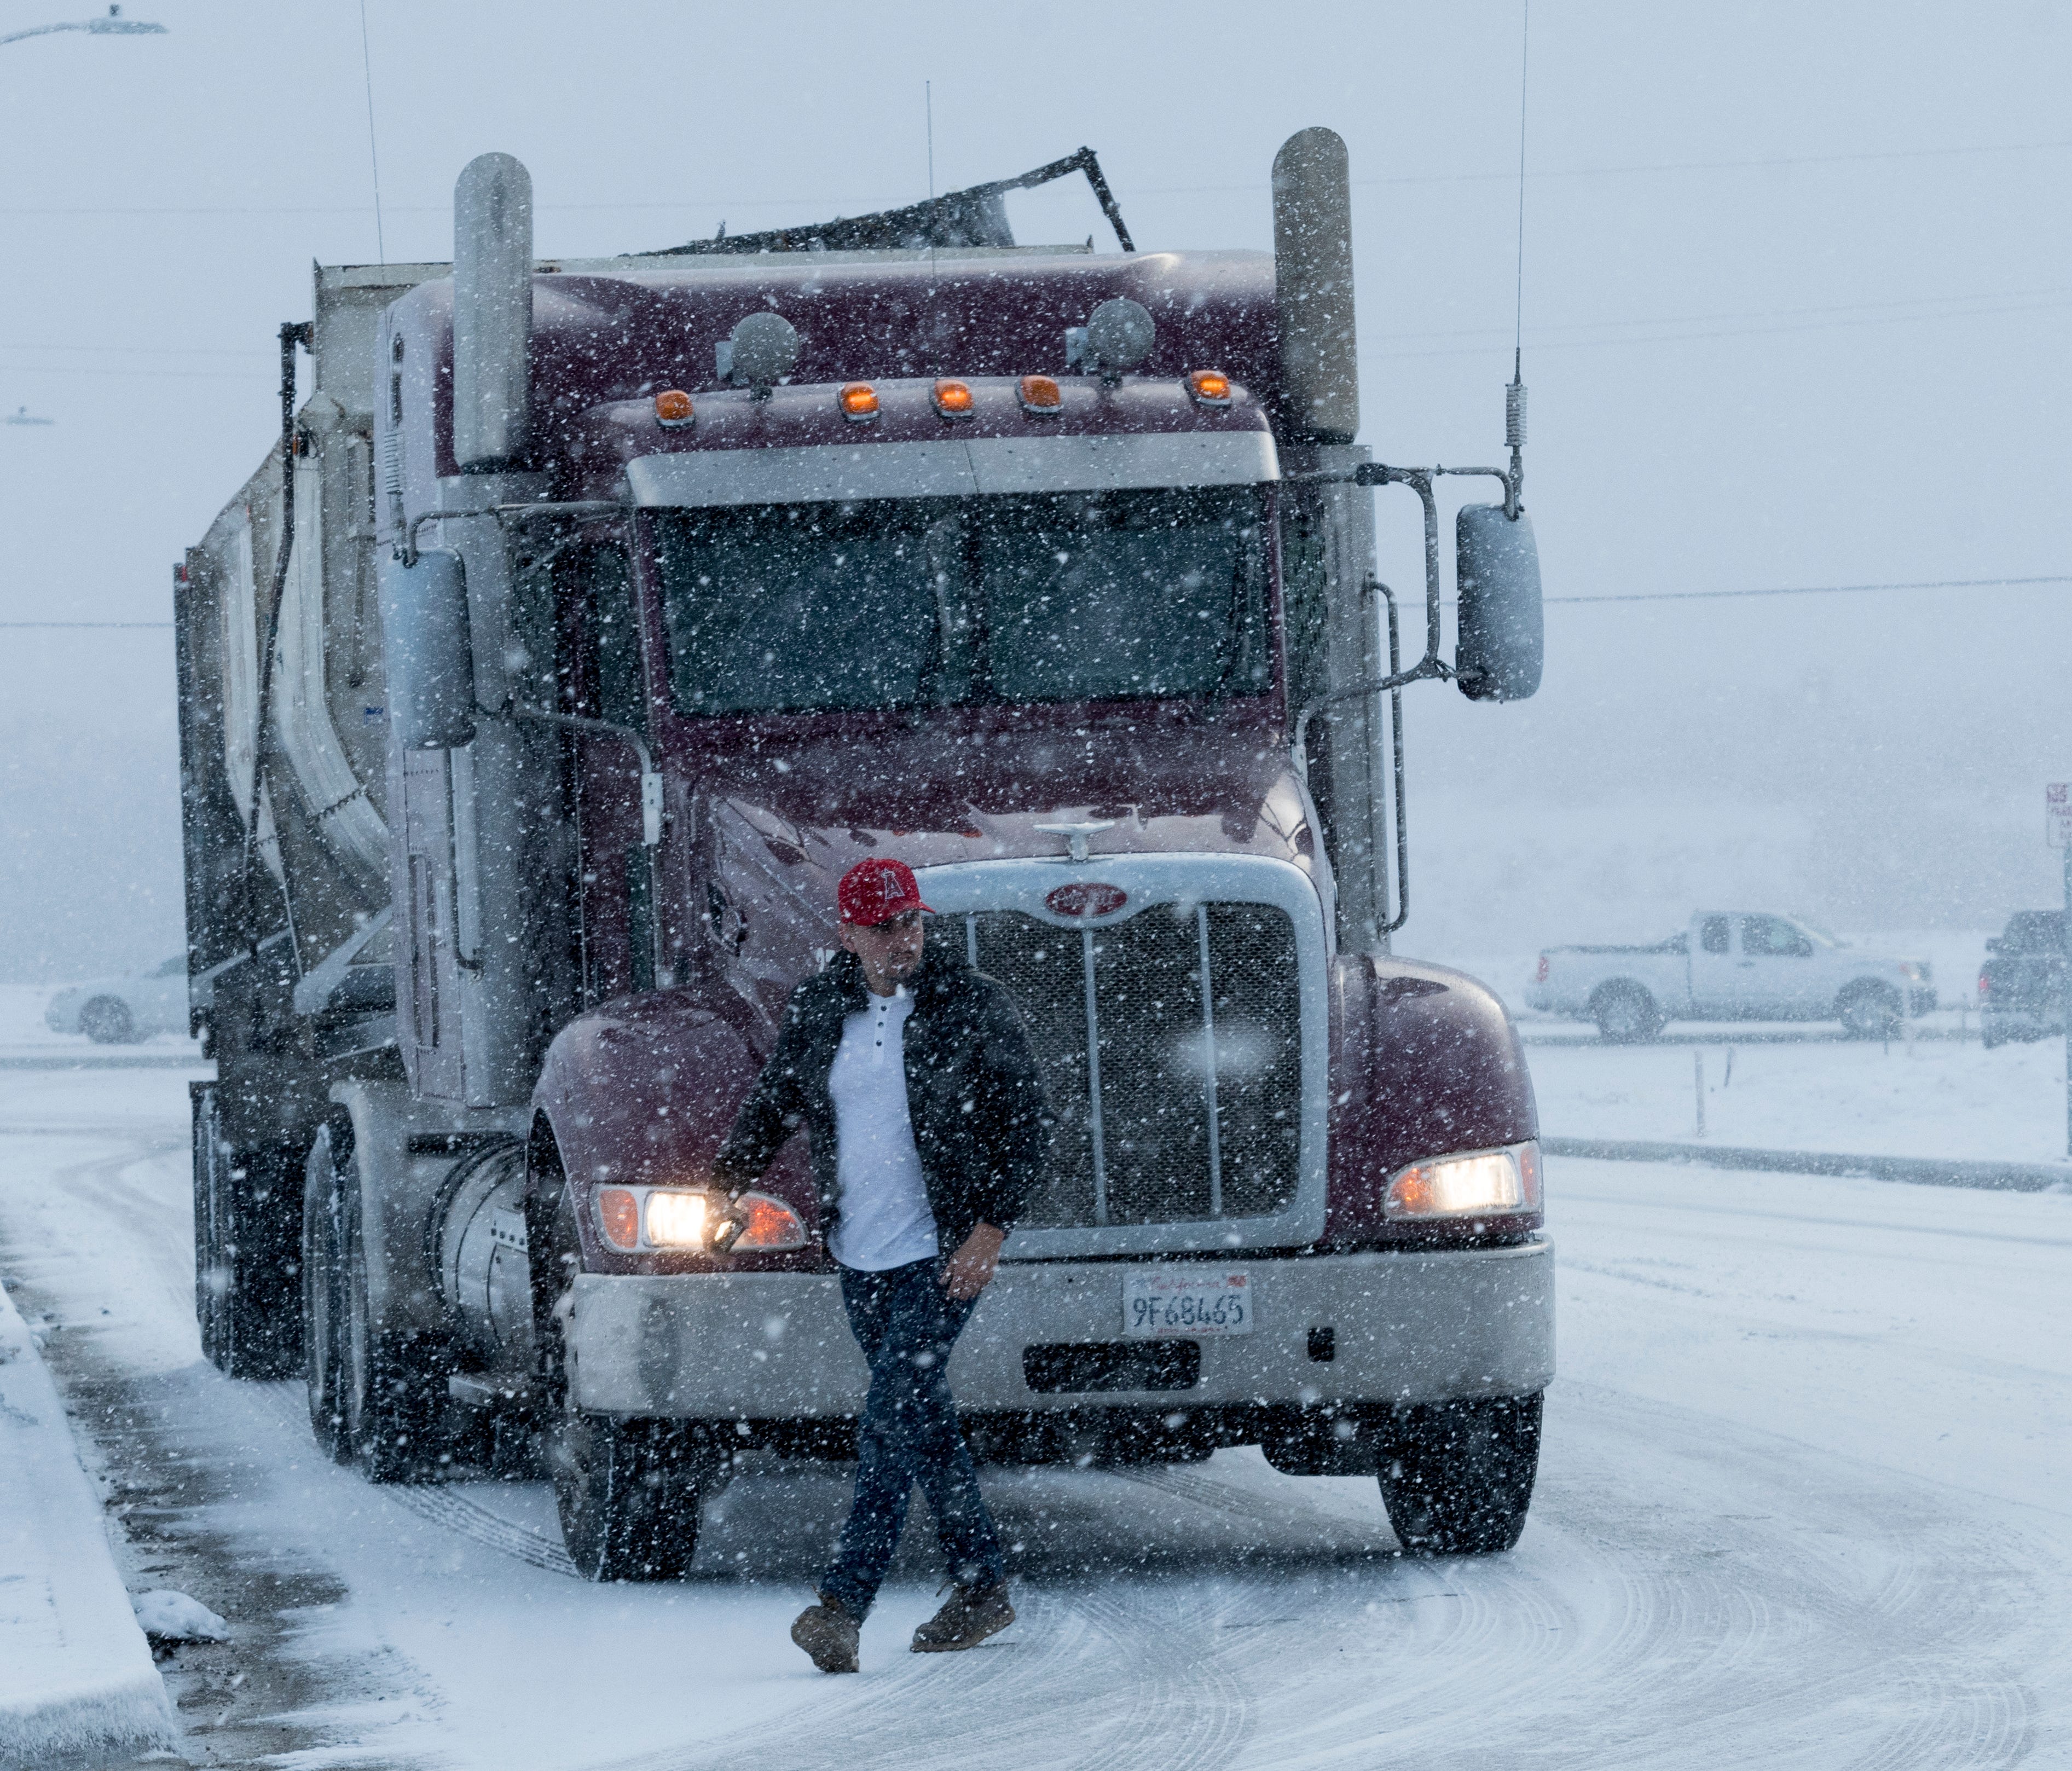 A truck driver makes his way through a snow storm which left a few inches of snow in the Cajon Pass and Oak Hills areas  in Hesperia, Calif., Tuesday Feb. 27, 2018. Many of California's mountains are sporting new coats of snow, much of it down to low